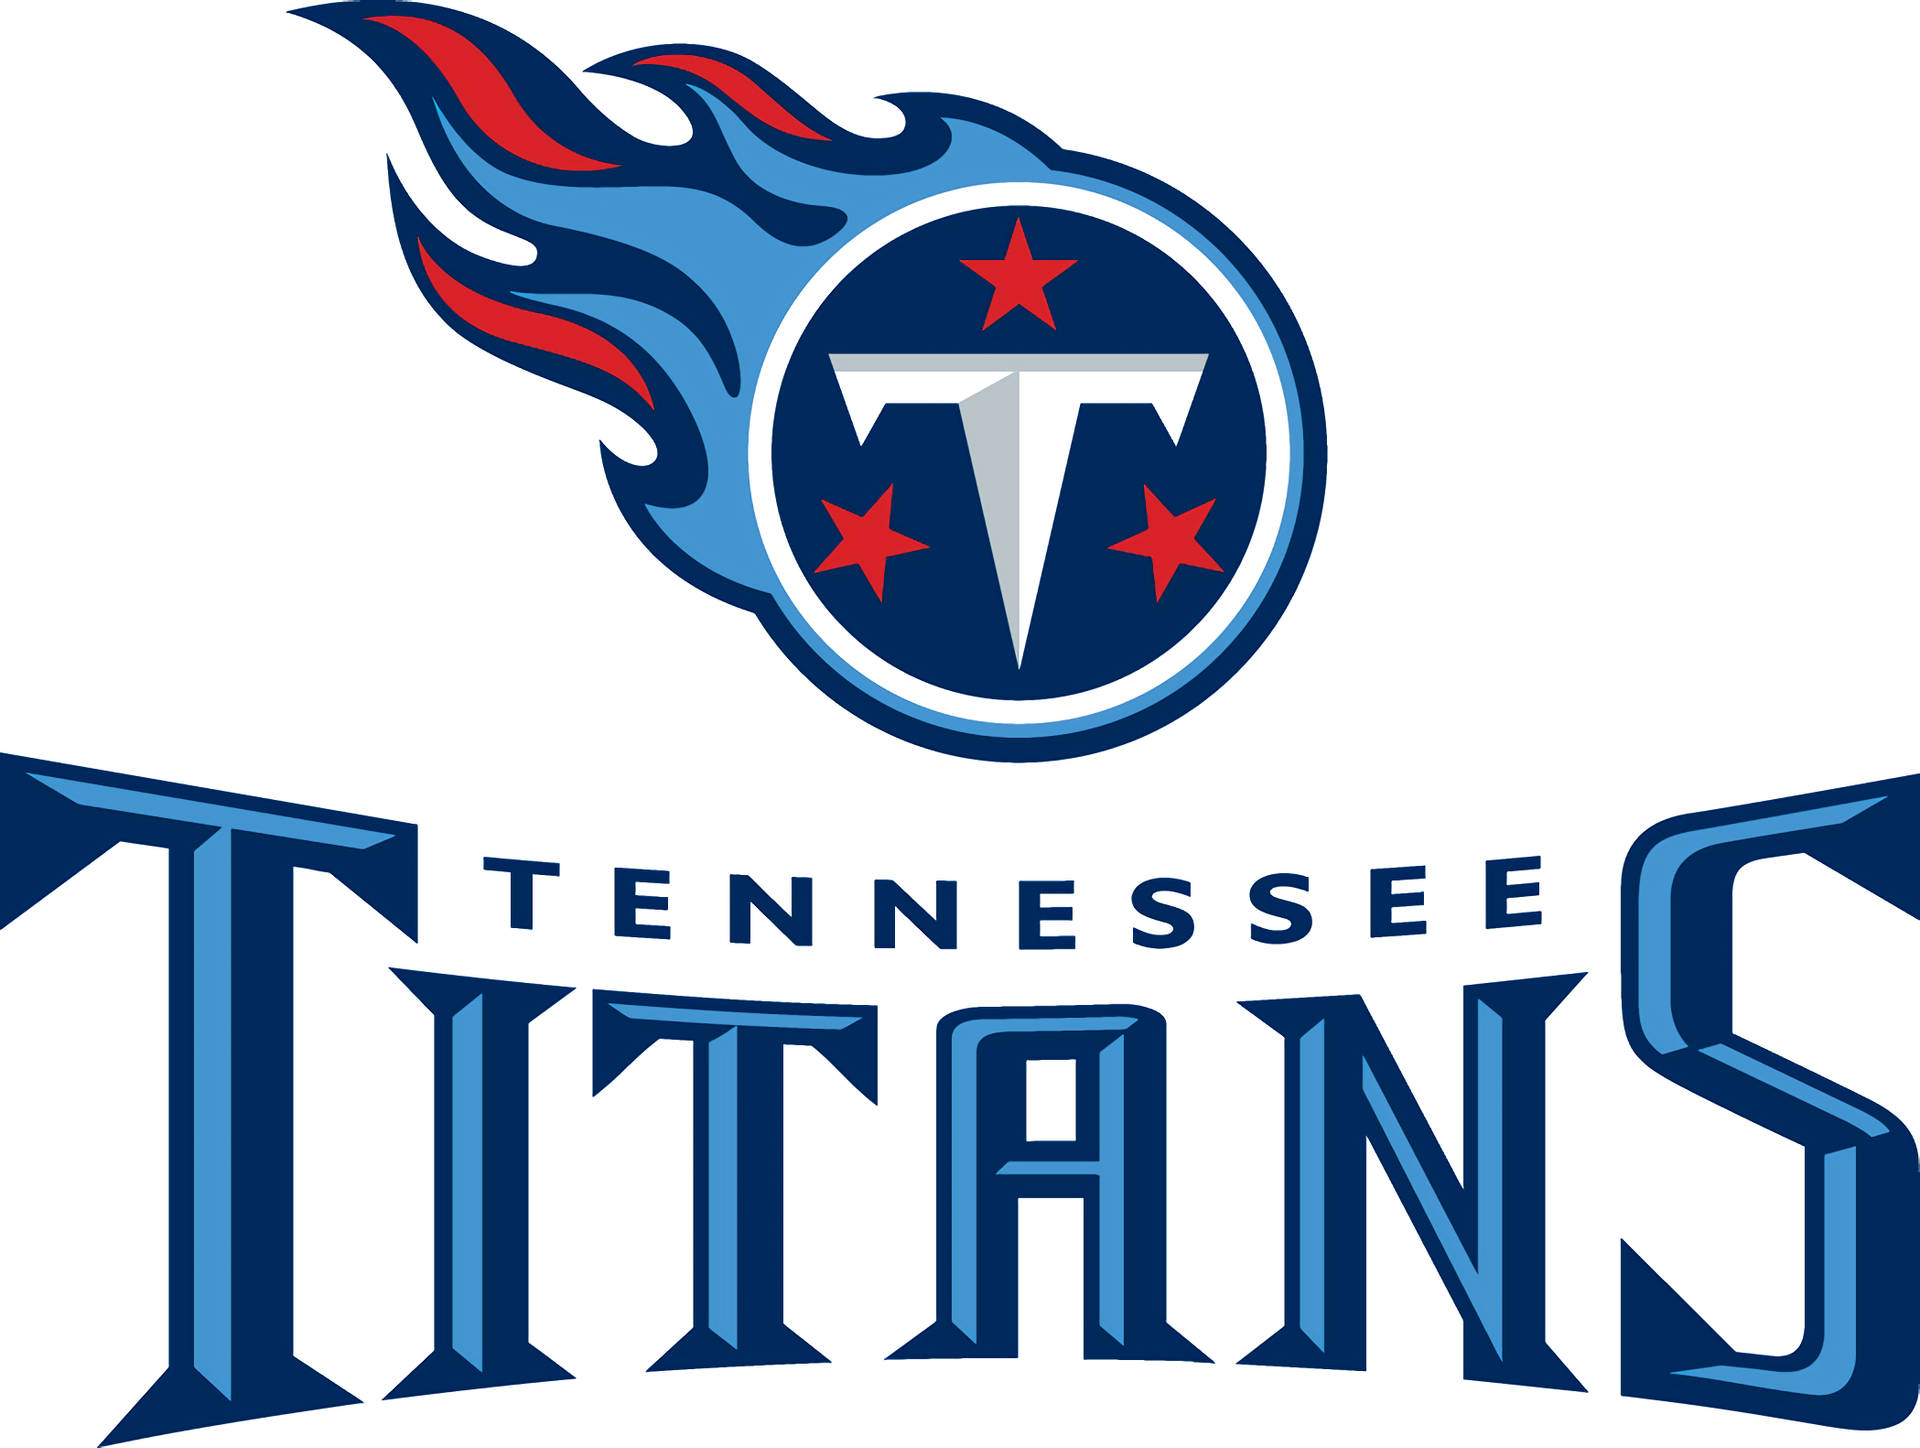 Tennessee Titans Official Logo Wallpaper